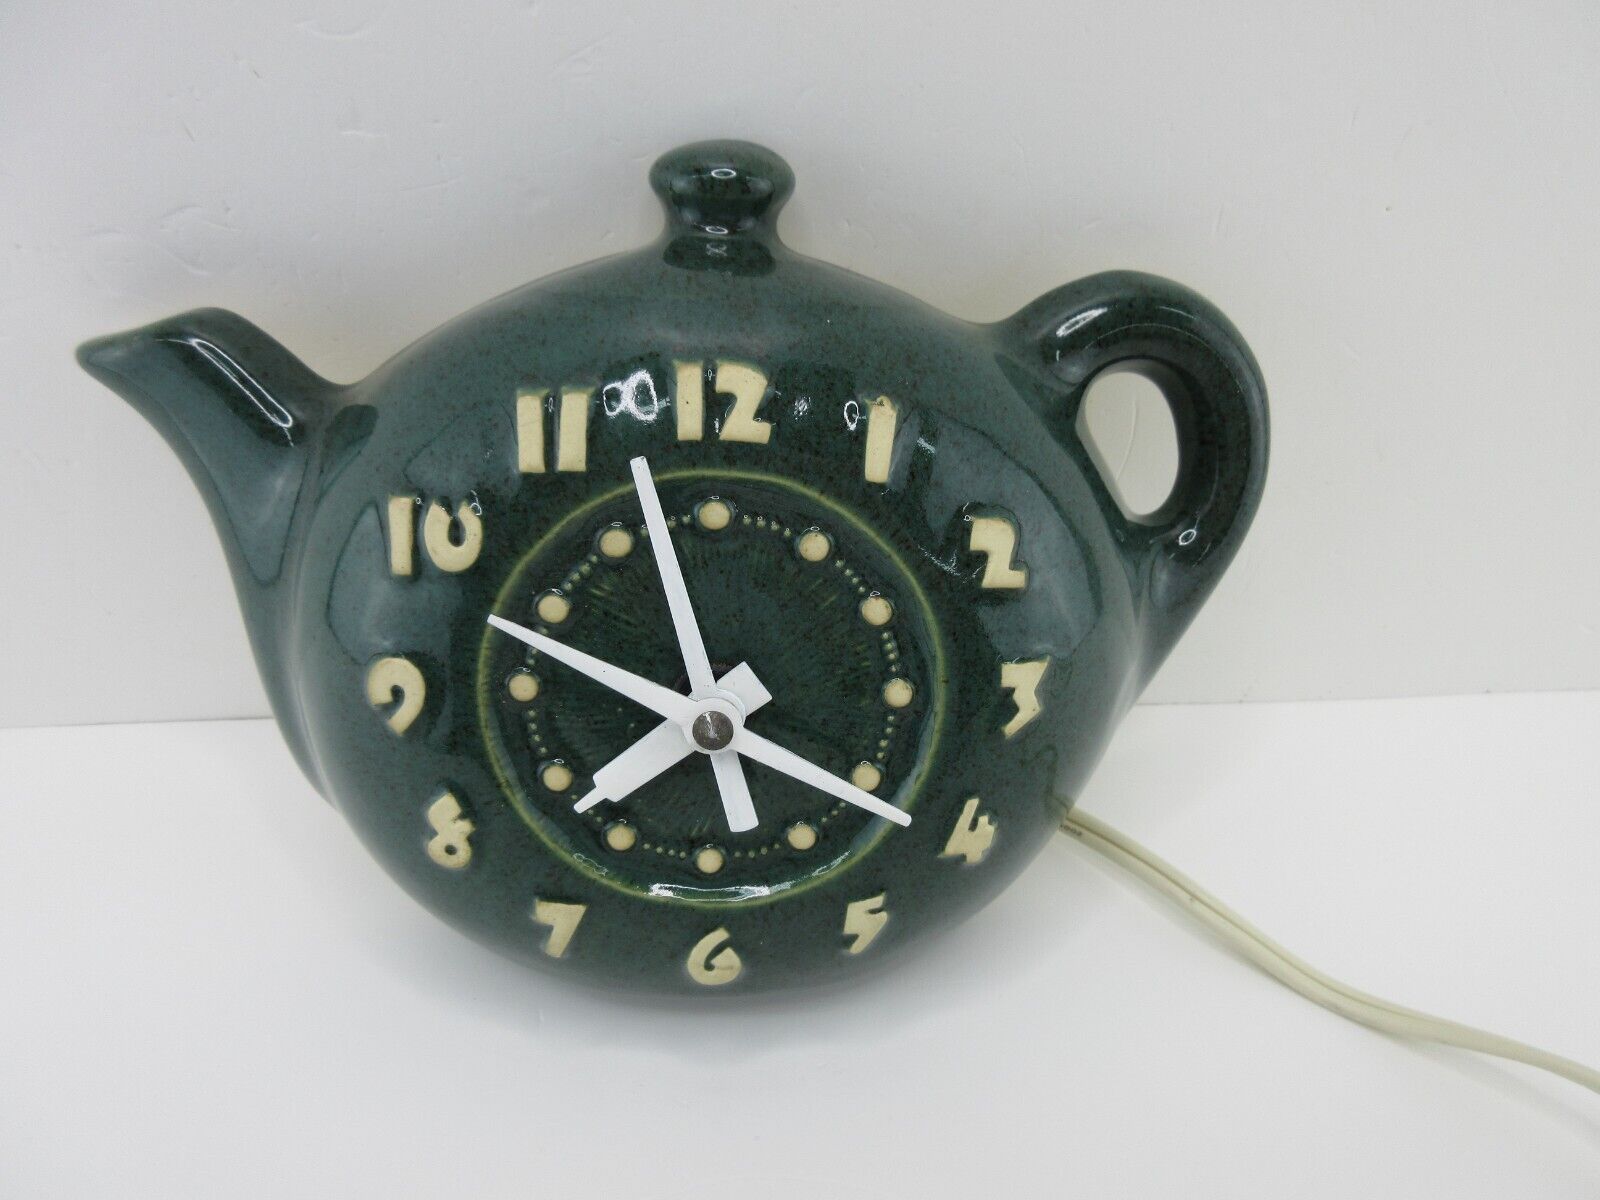 Vintage Ceramic Tea Kettle Clock by Sessions - Recently Serviced